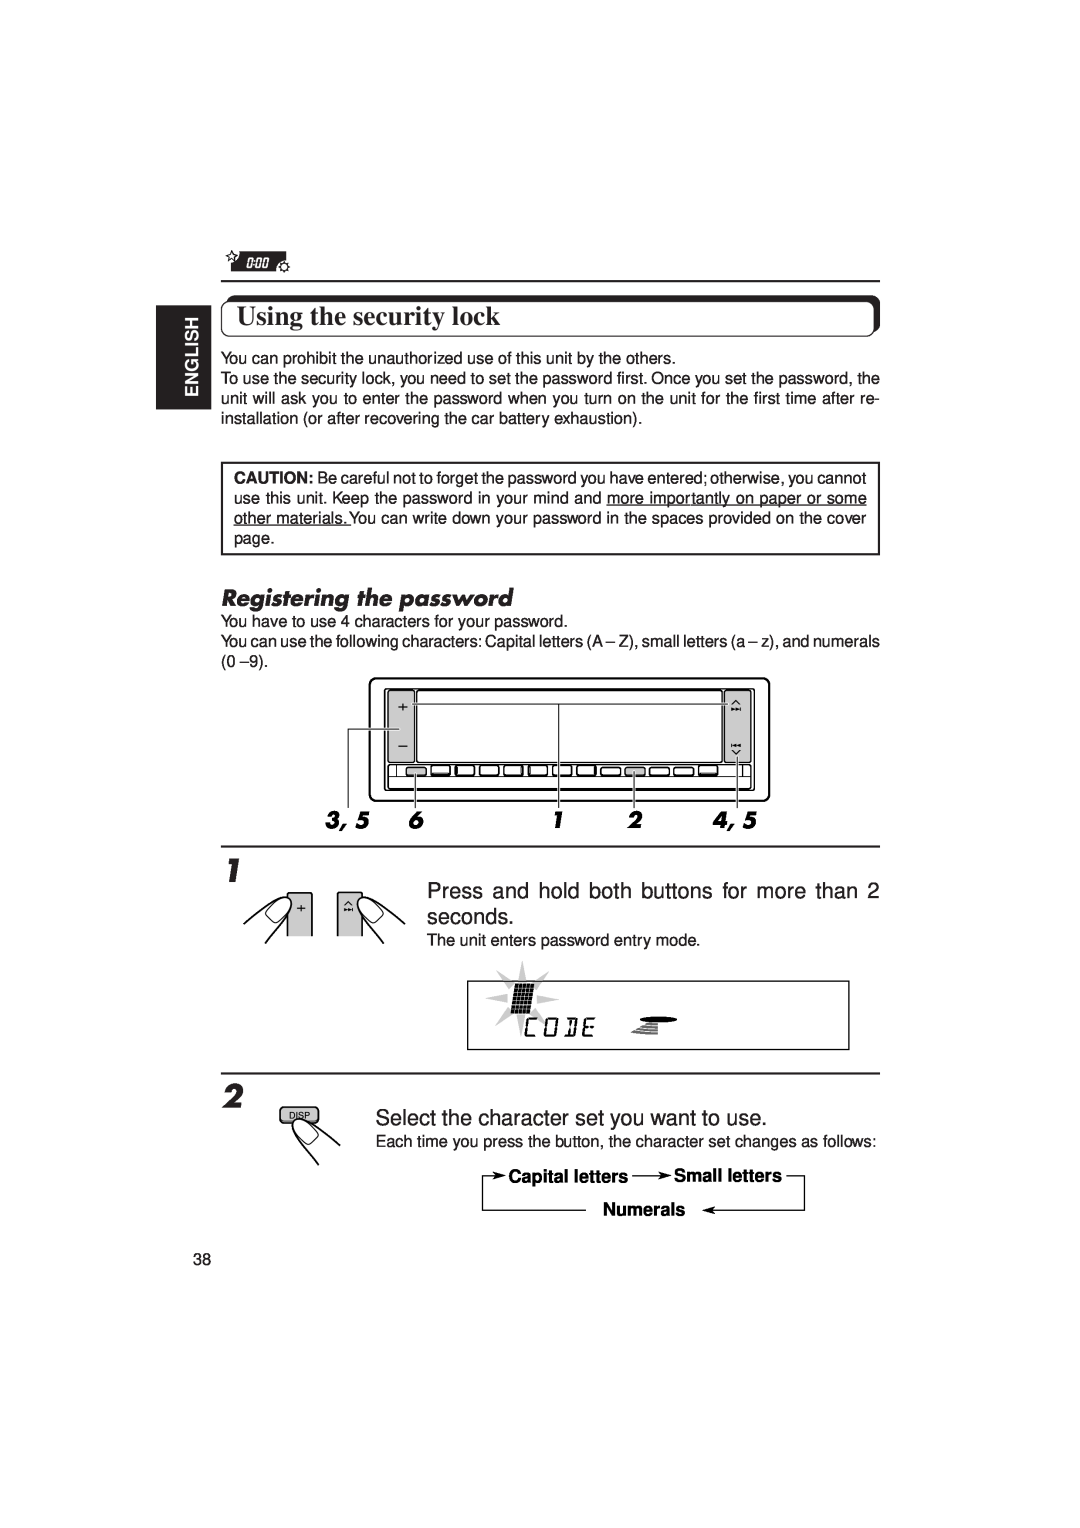 JVC KD-LX3R manual Using the security lock, Select the character set you want to use, Registering the password, English 